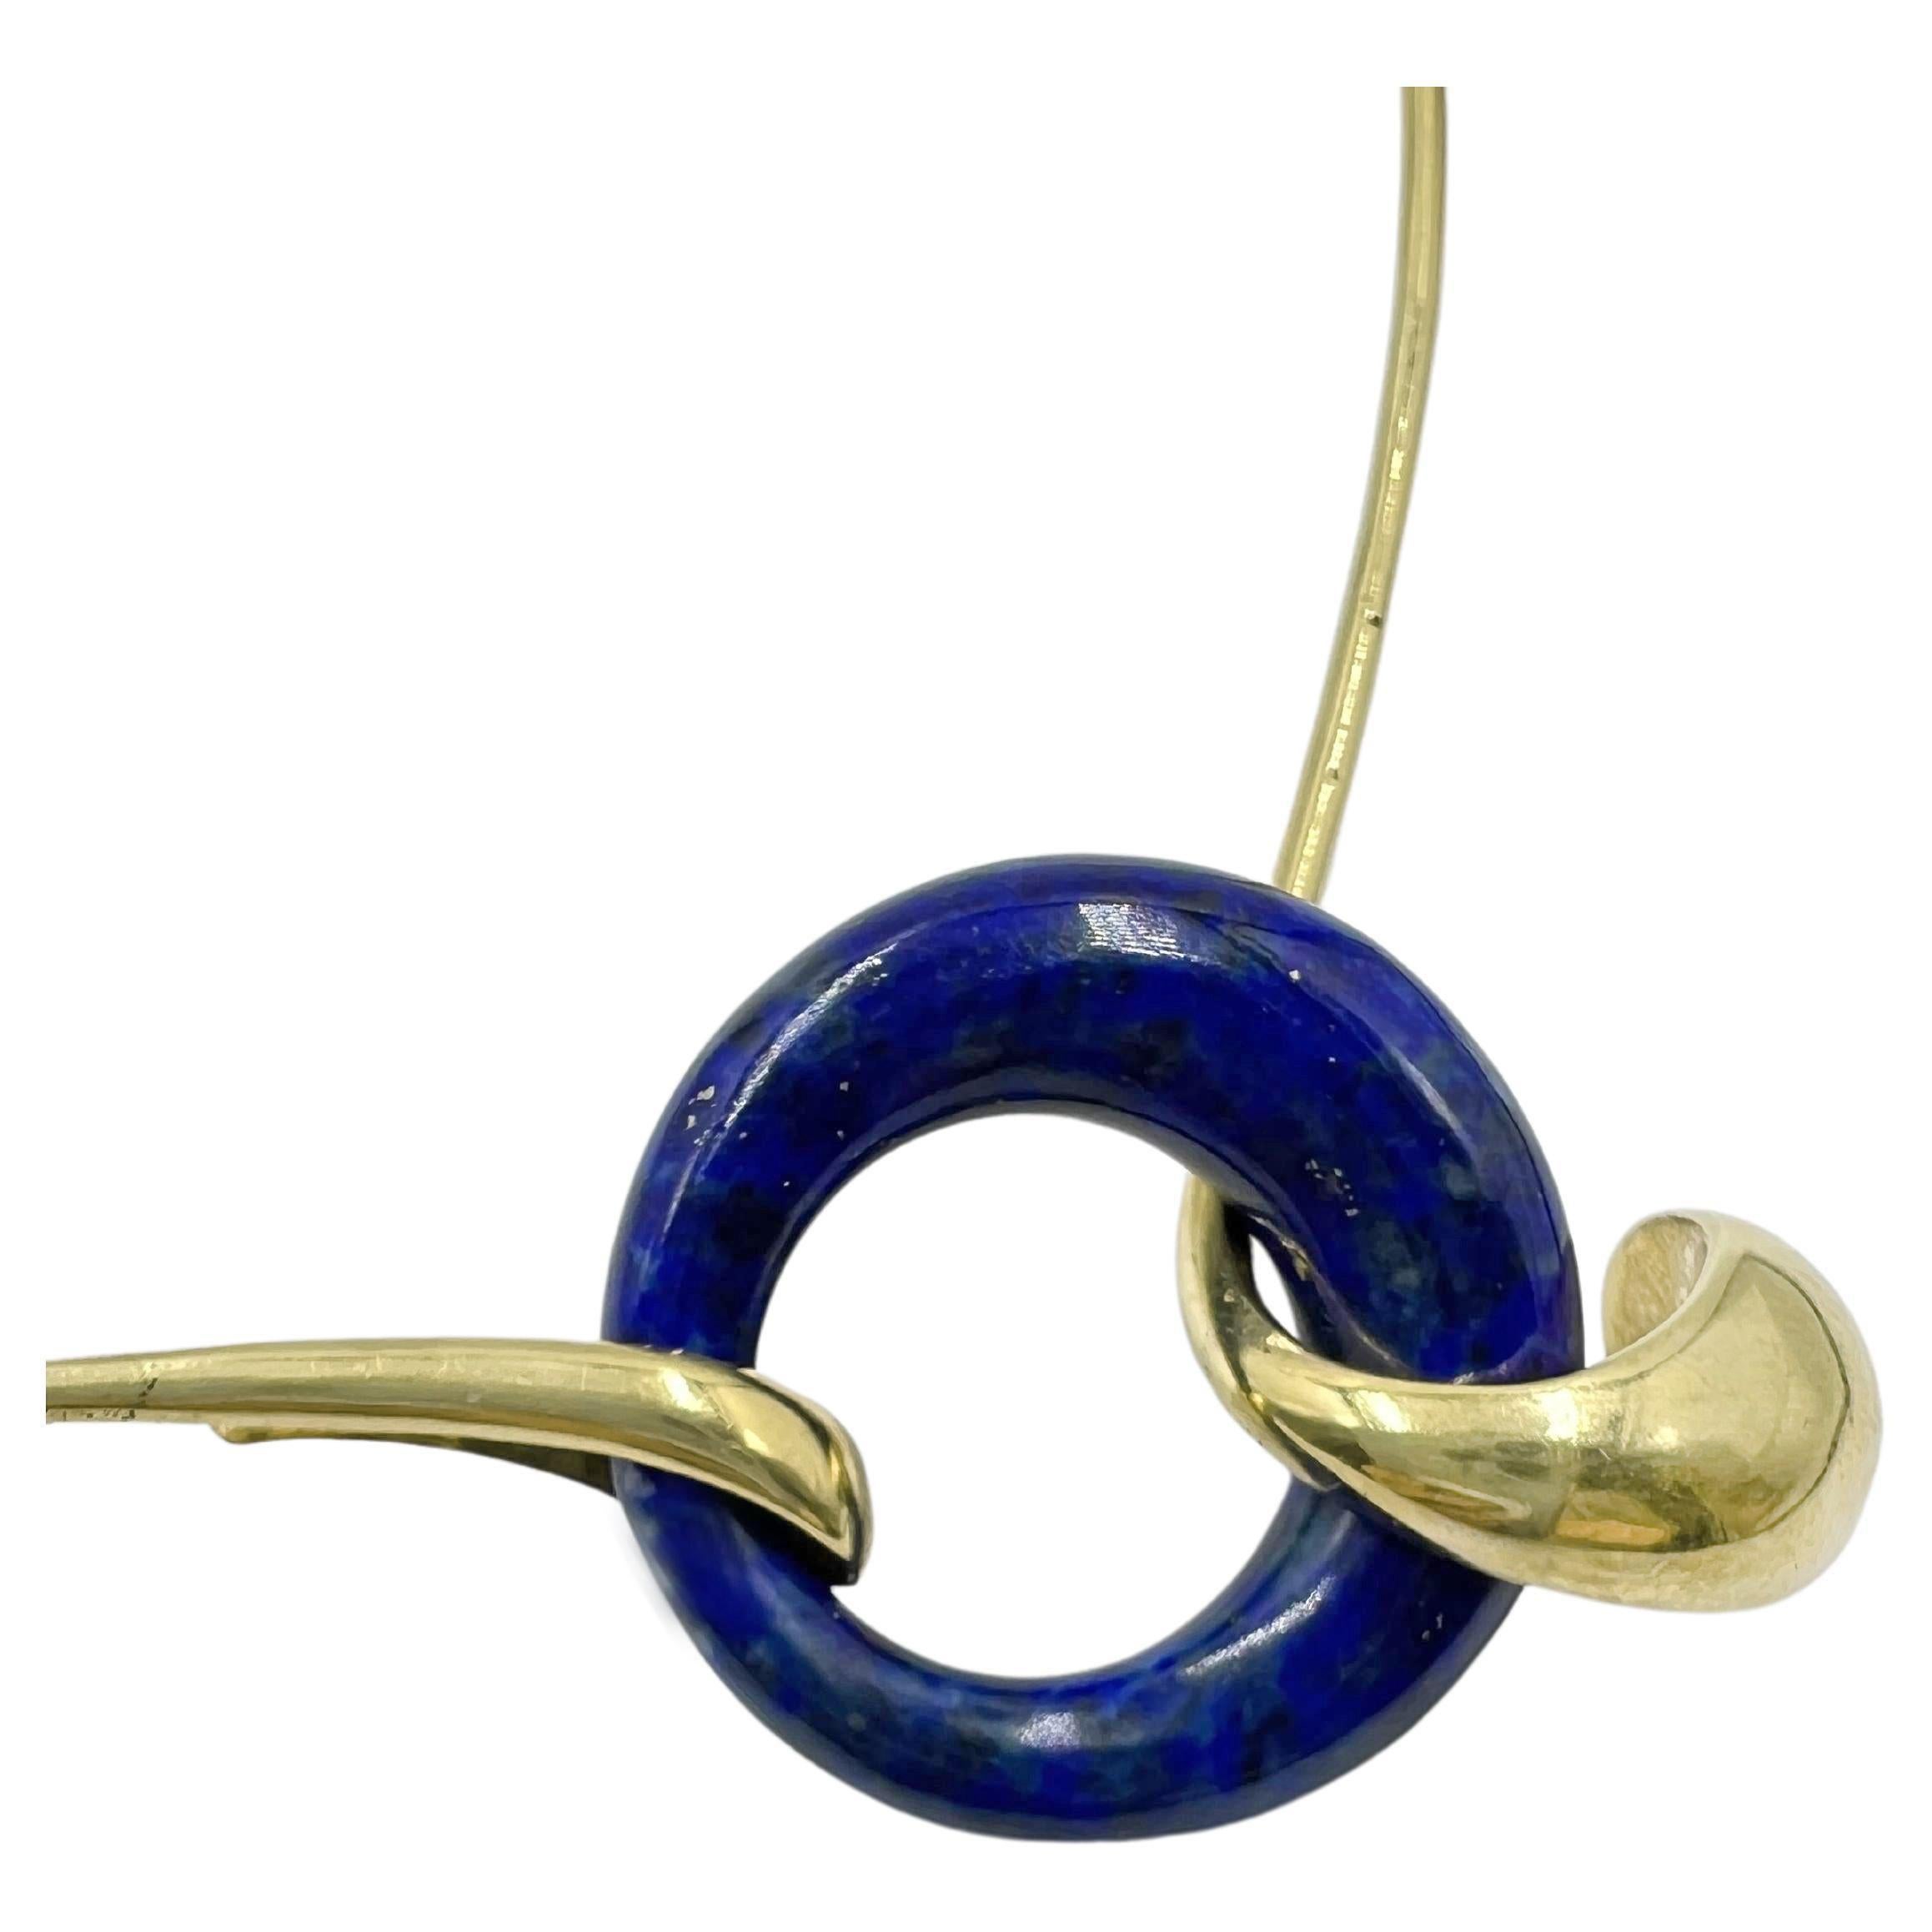 Rare and collectible 1970s design by Elsa Peretti for Tiffany & Co.  18k yellow gold wire collar centering a sculptural lapis lazuli ring measuring 28.45mm diameter.  Flecks of natural calcite and pyrite adorn the rich blue color.  Polished and